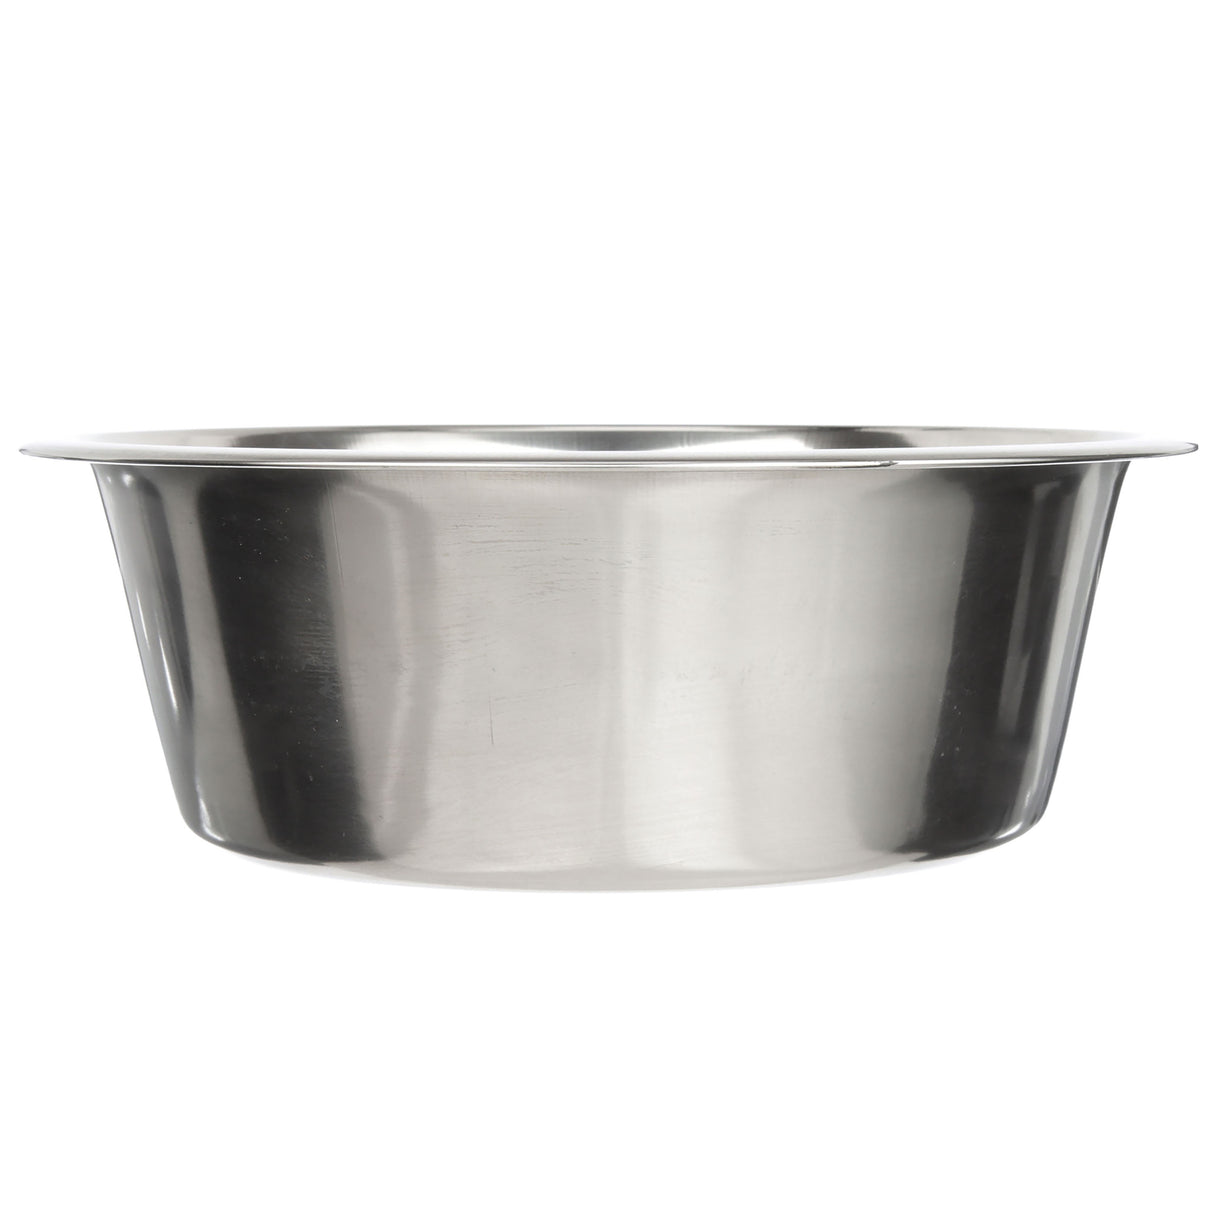 Side view of stainless steel pet bowl